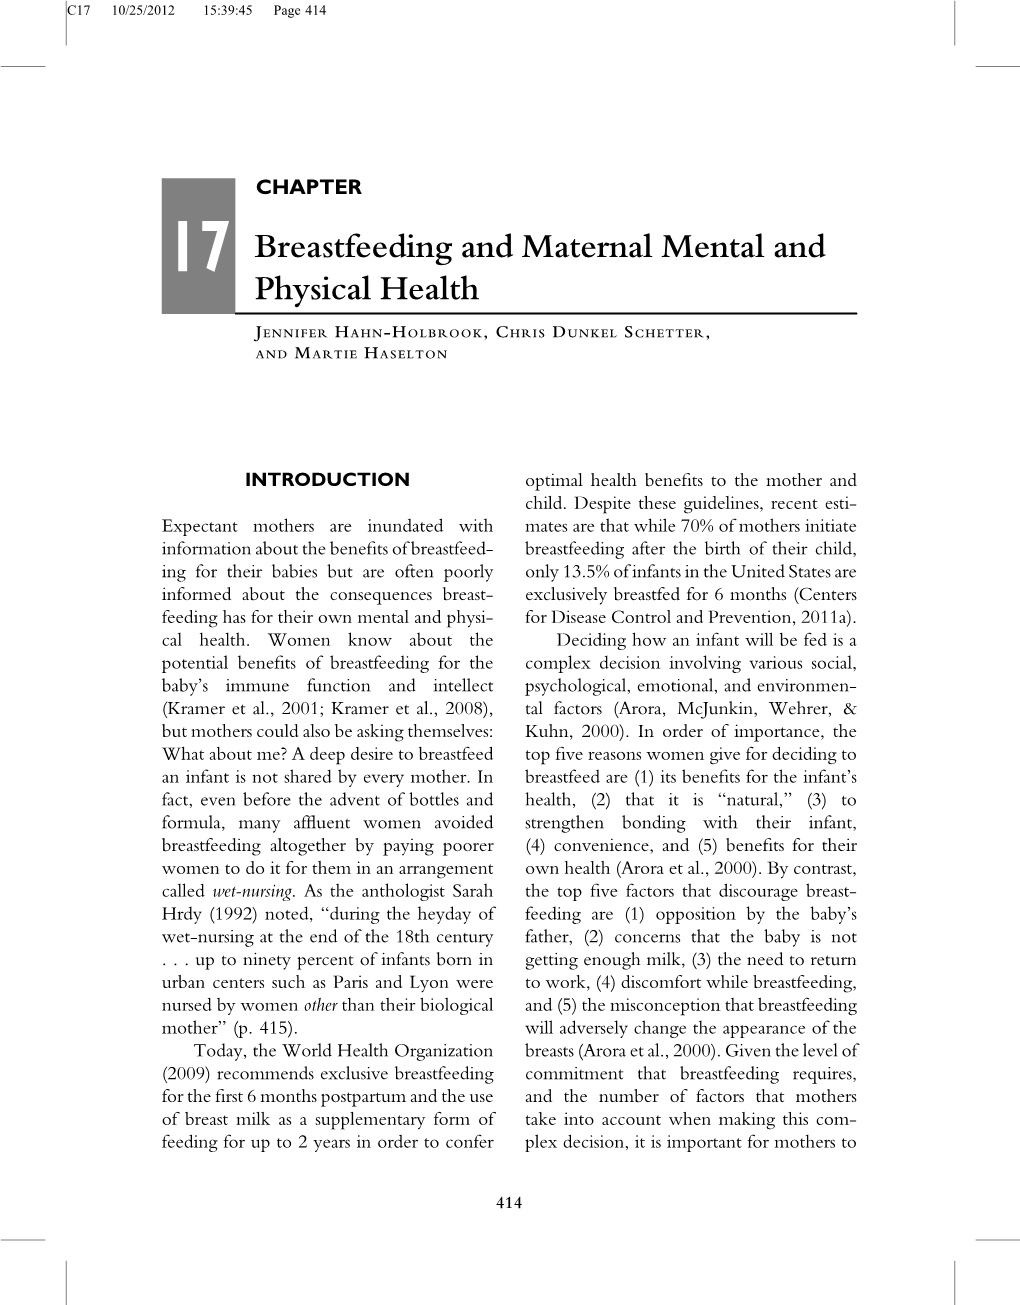 Breastfeeding and Maternal Mental and Physical Health